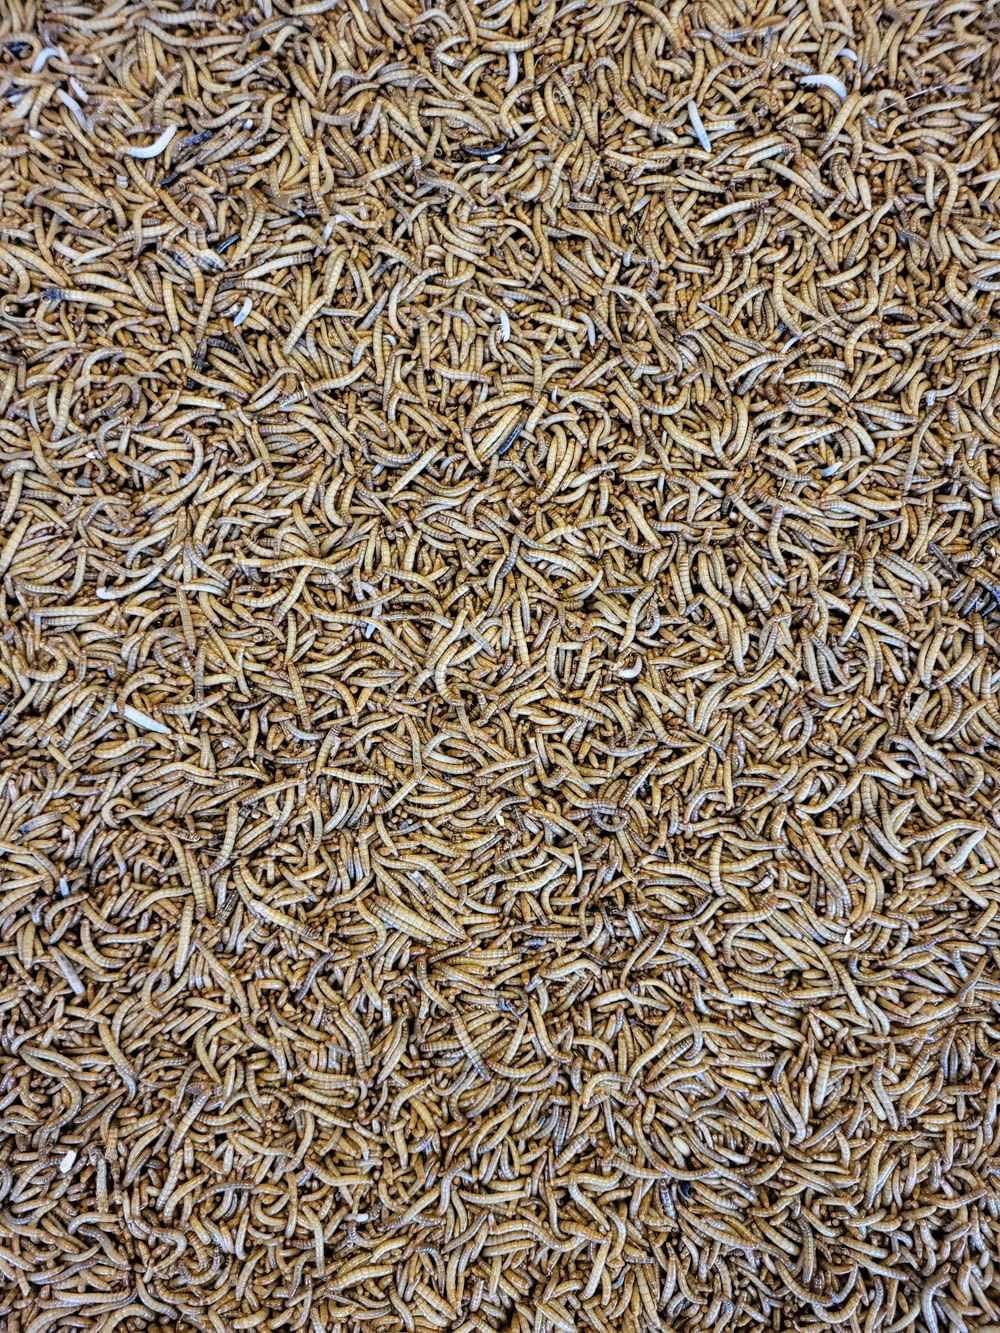 a close up of a pile of brown rice